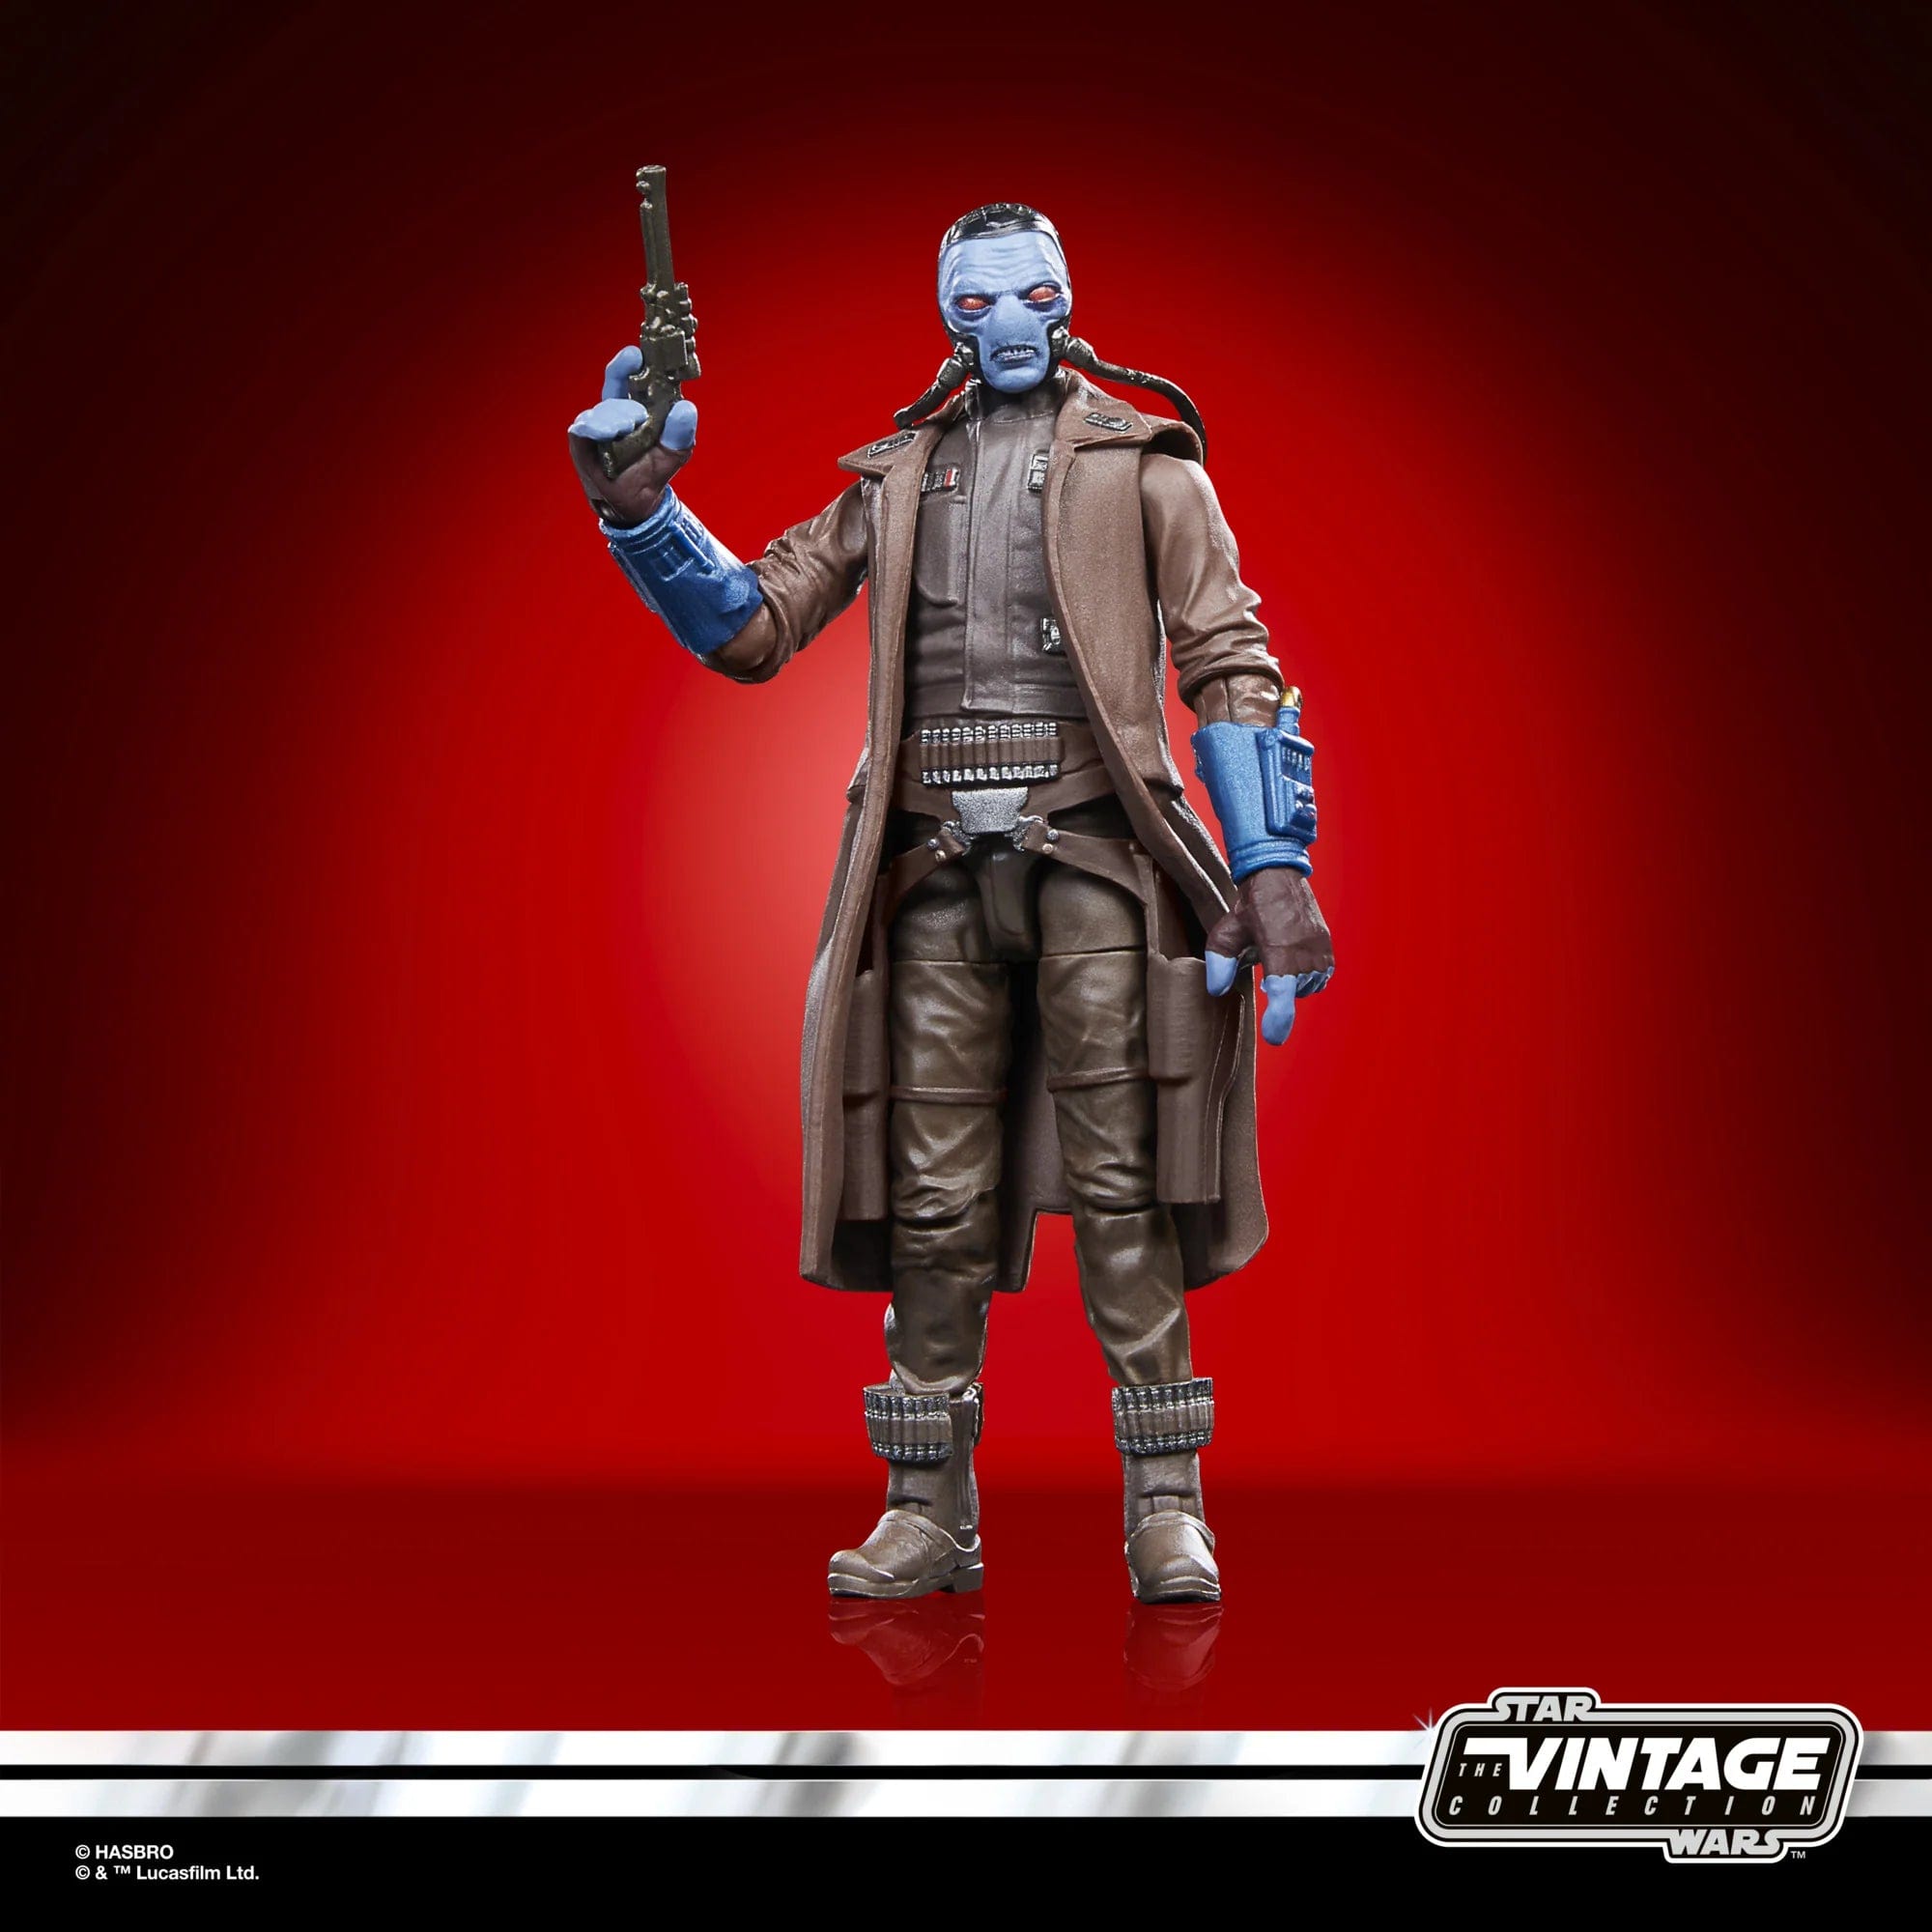 Star Wars The Vintage Collection Cad Bane